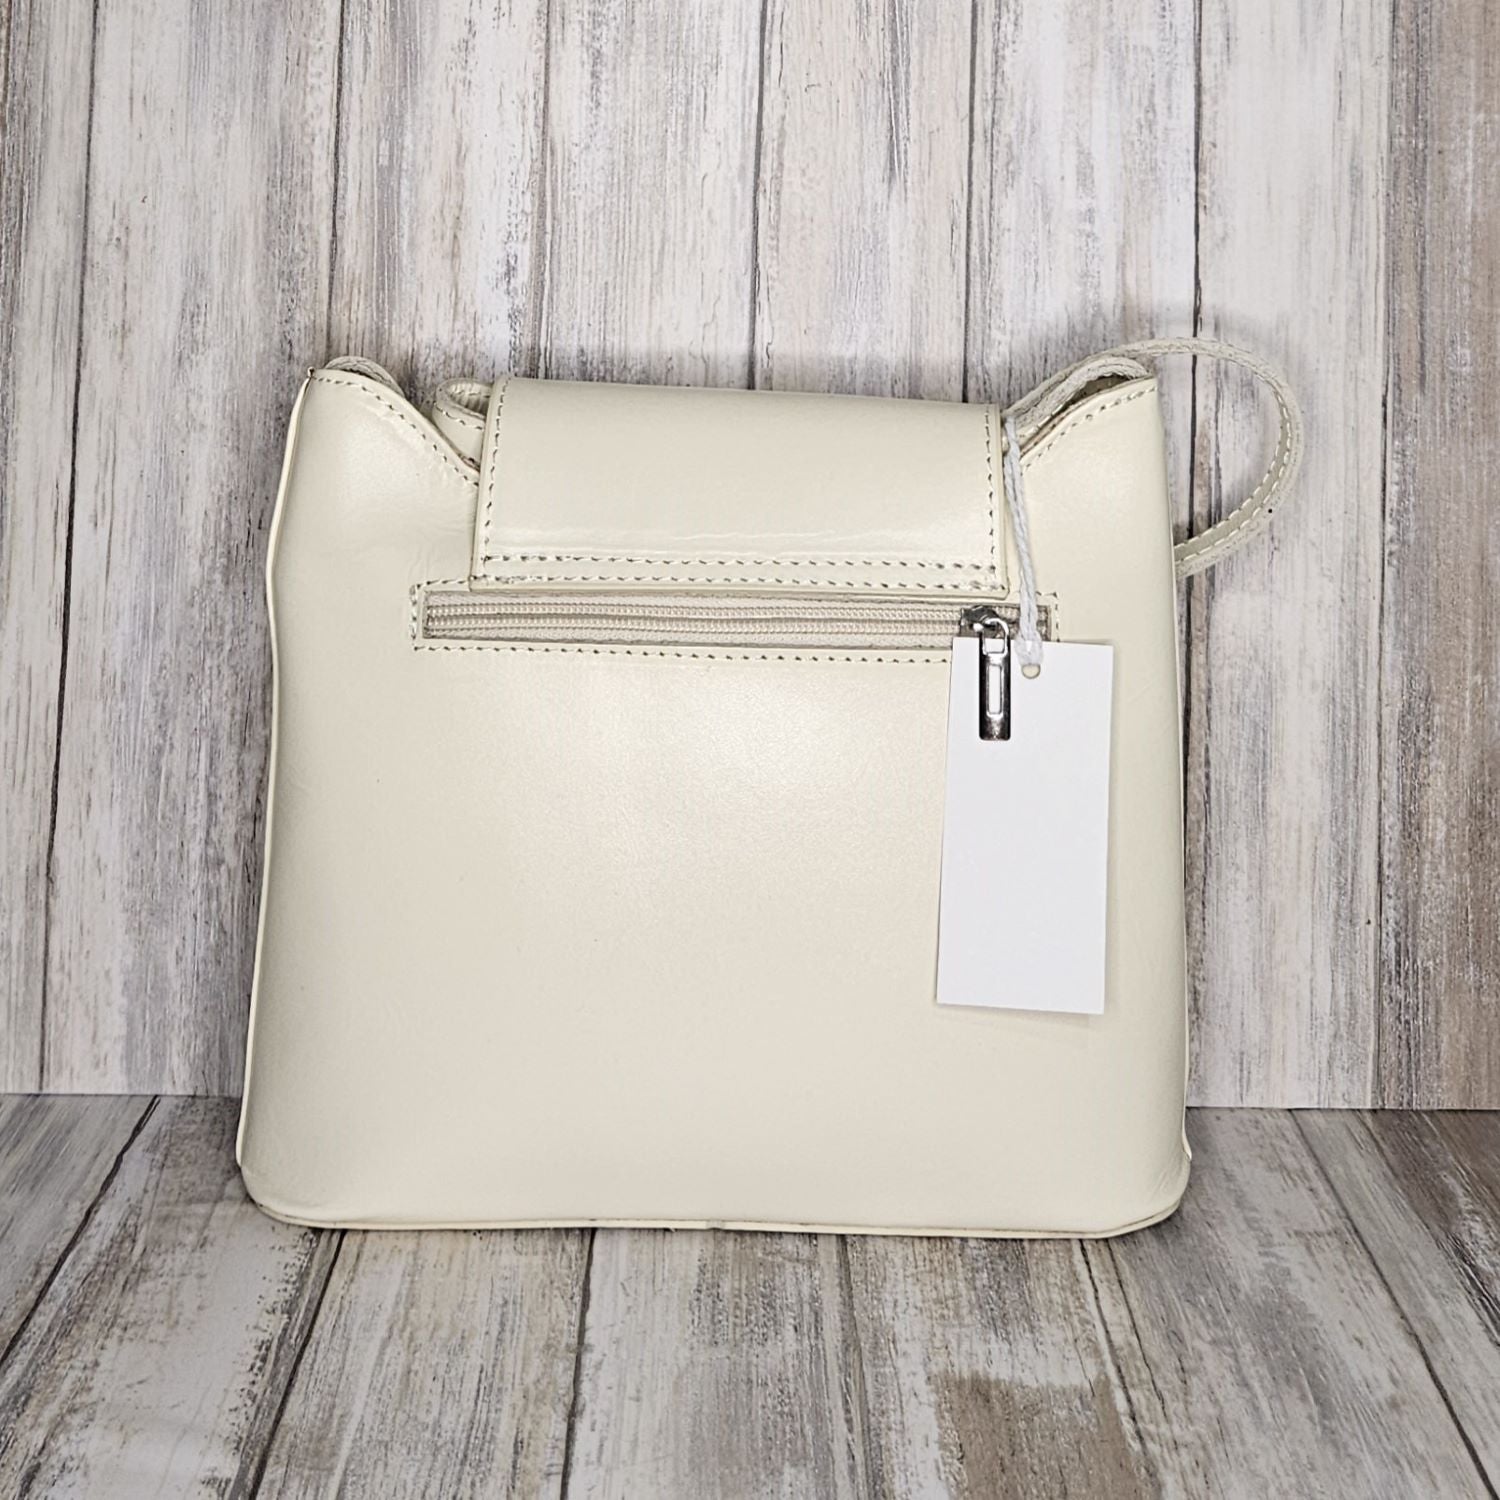 Crafted with Italian leather, this cross body bag features a magnetic dot and zip closure and an adjustable strap for a stylish look.       Back Zip Pocket   Internal Slip Pocket   Silver Hardware   H20cm x W24cm x D6cm